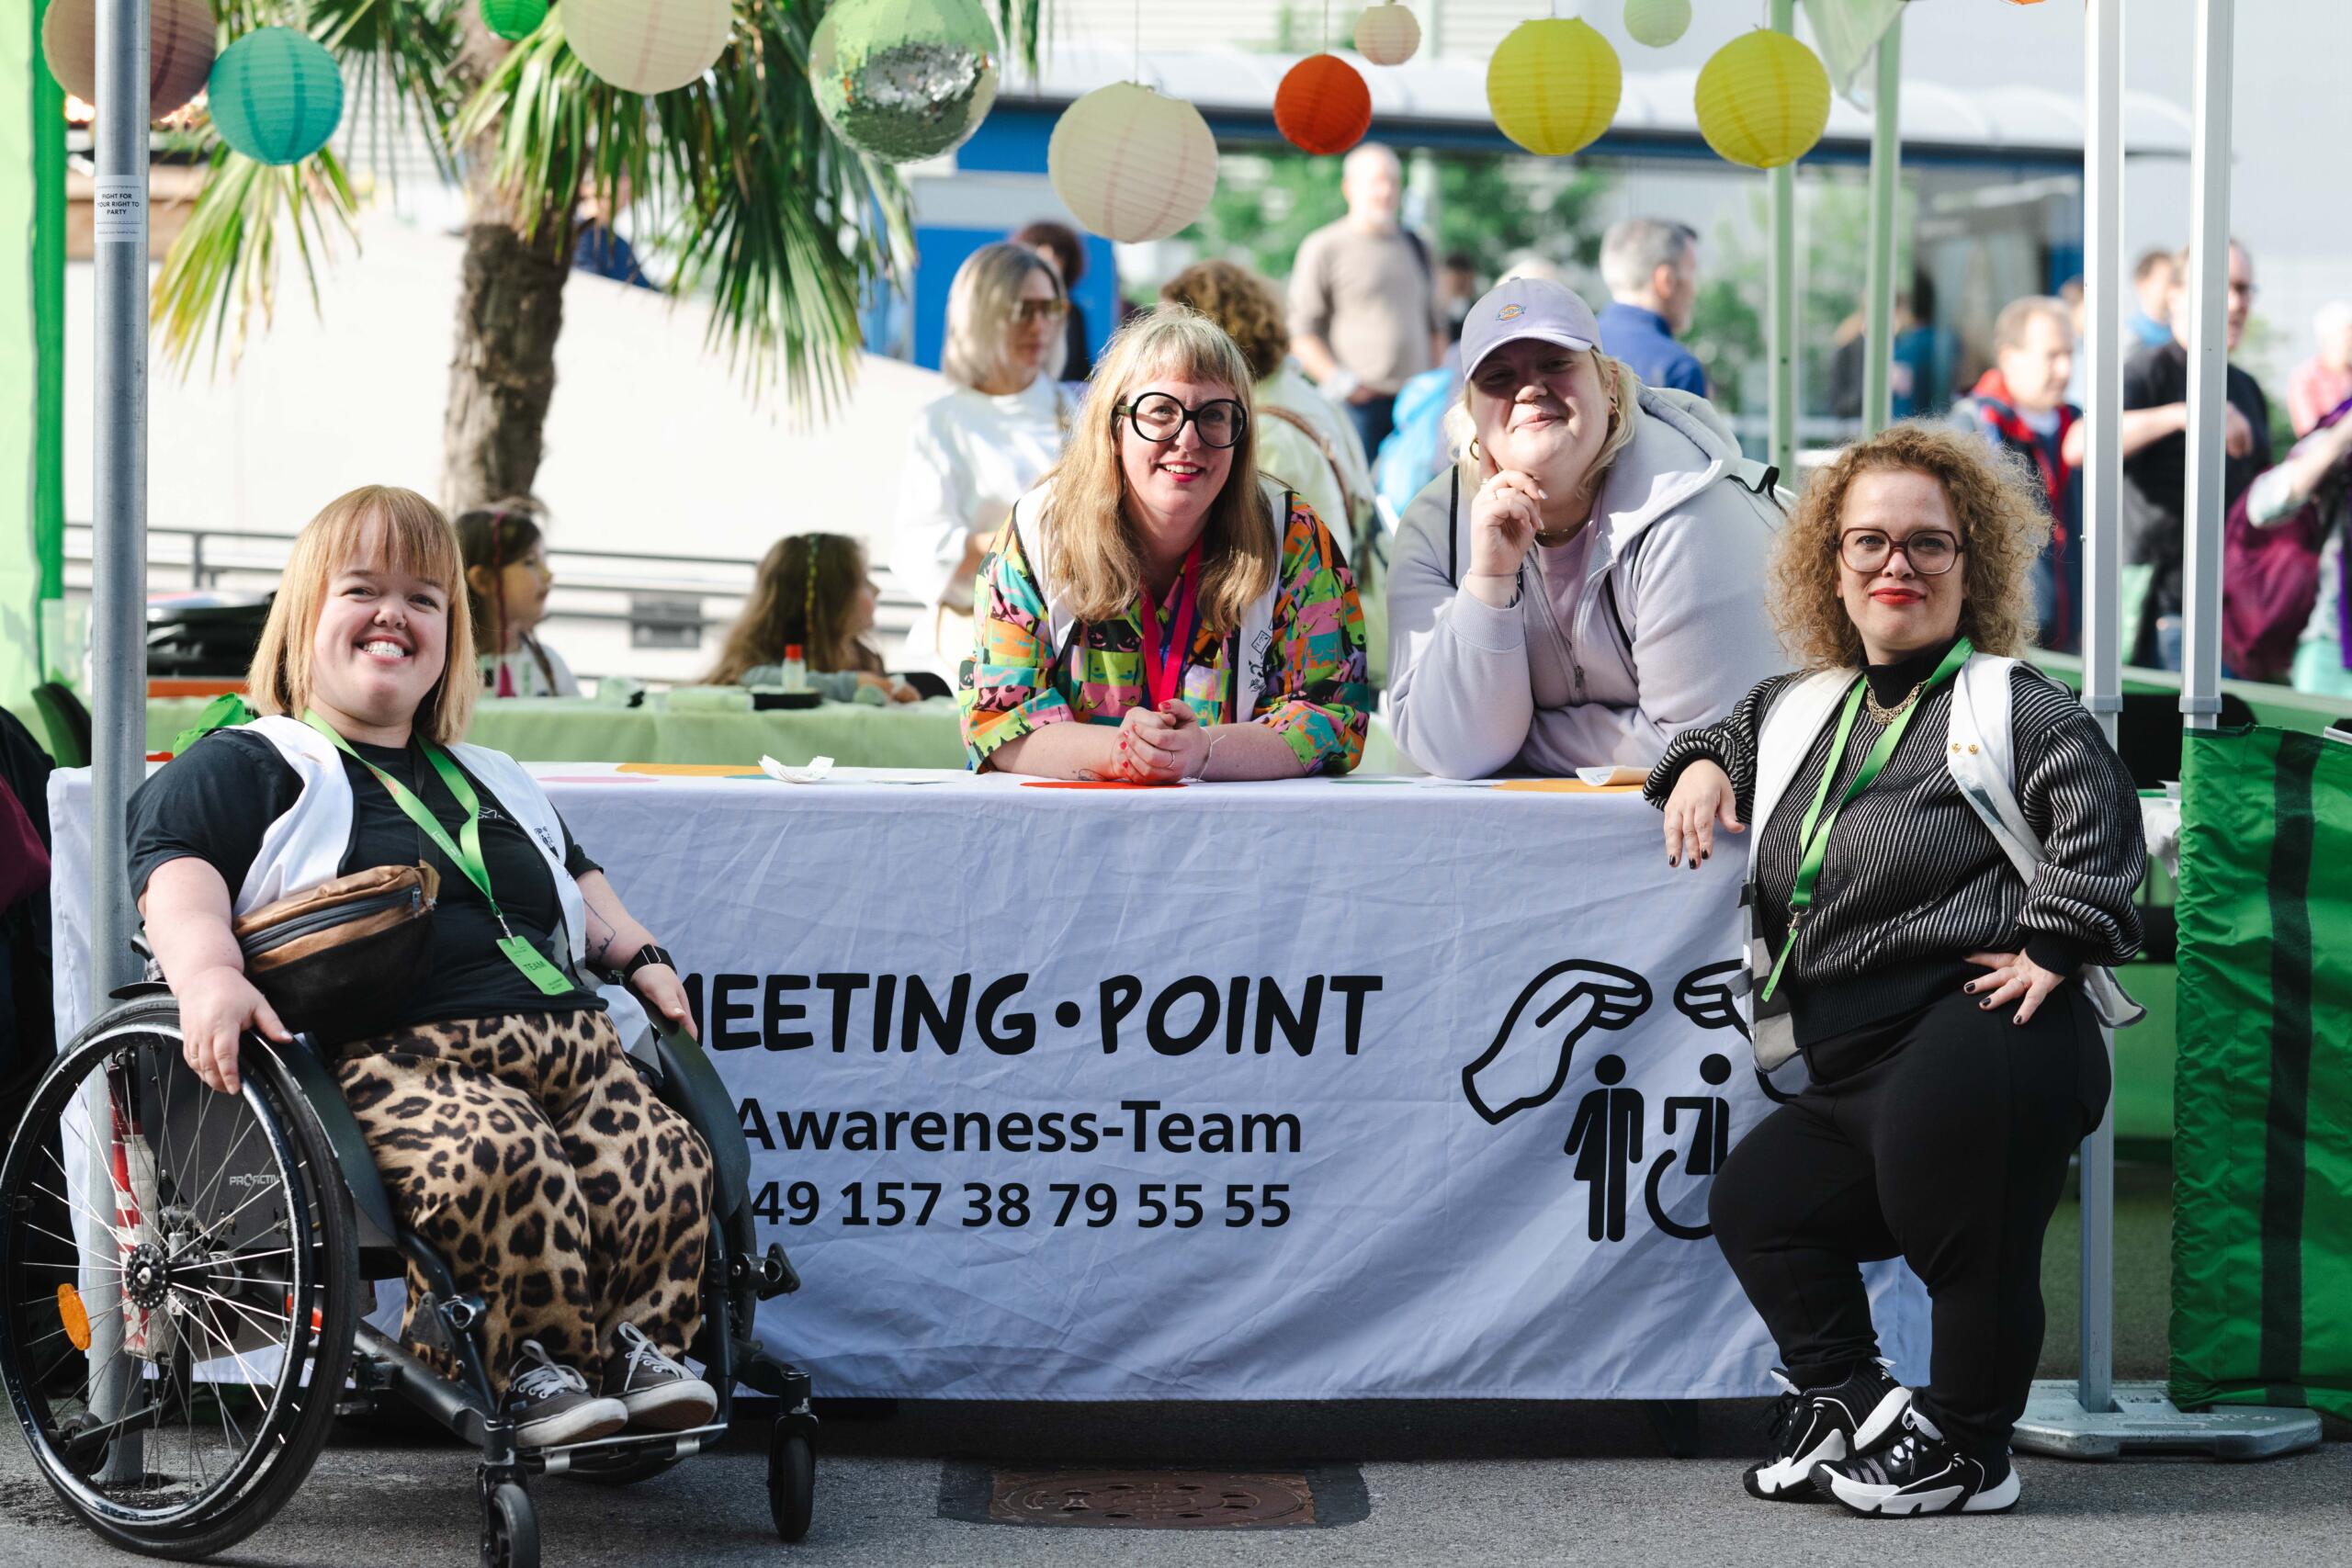 Four members of the Barrier-free Celebrations initiative at their meeting point